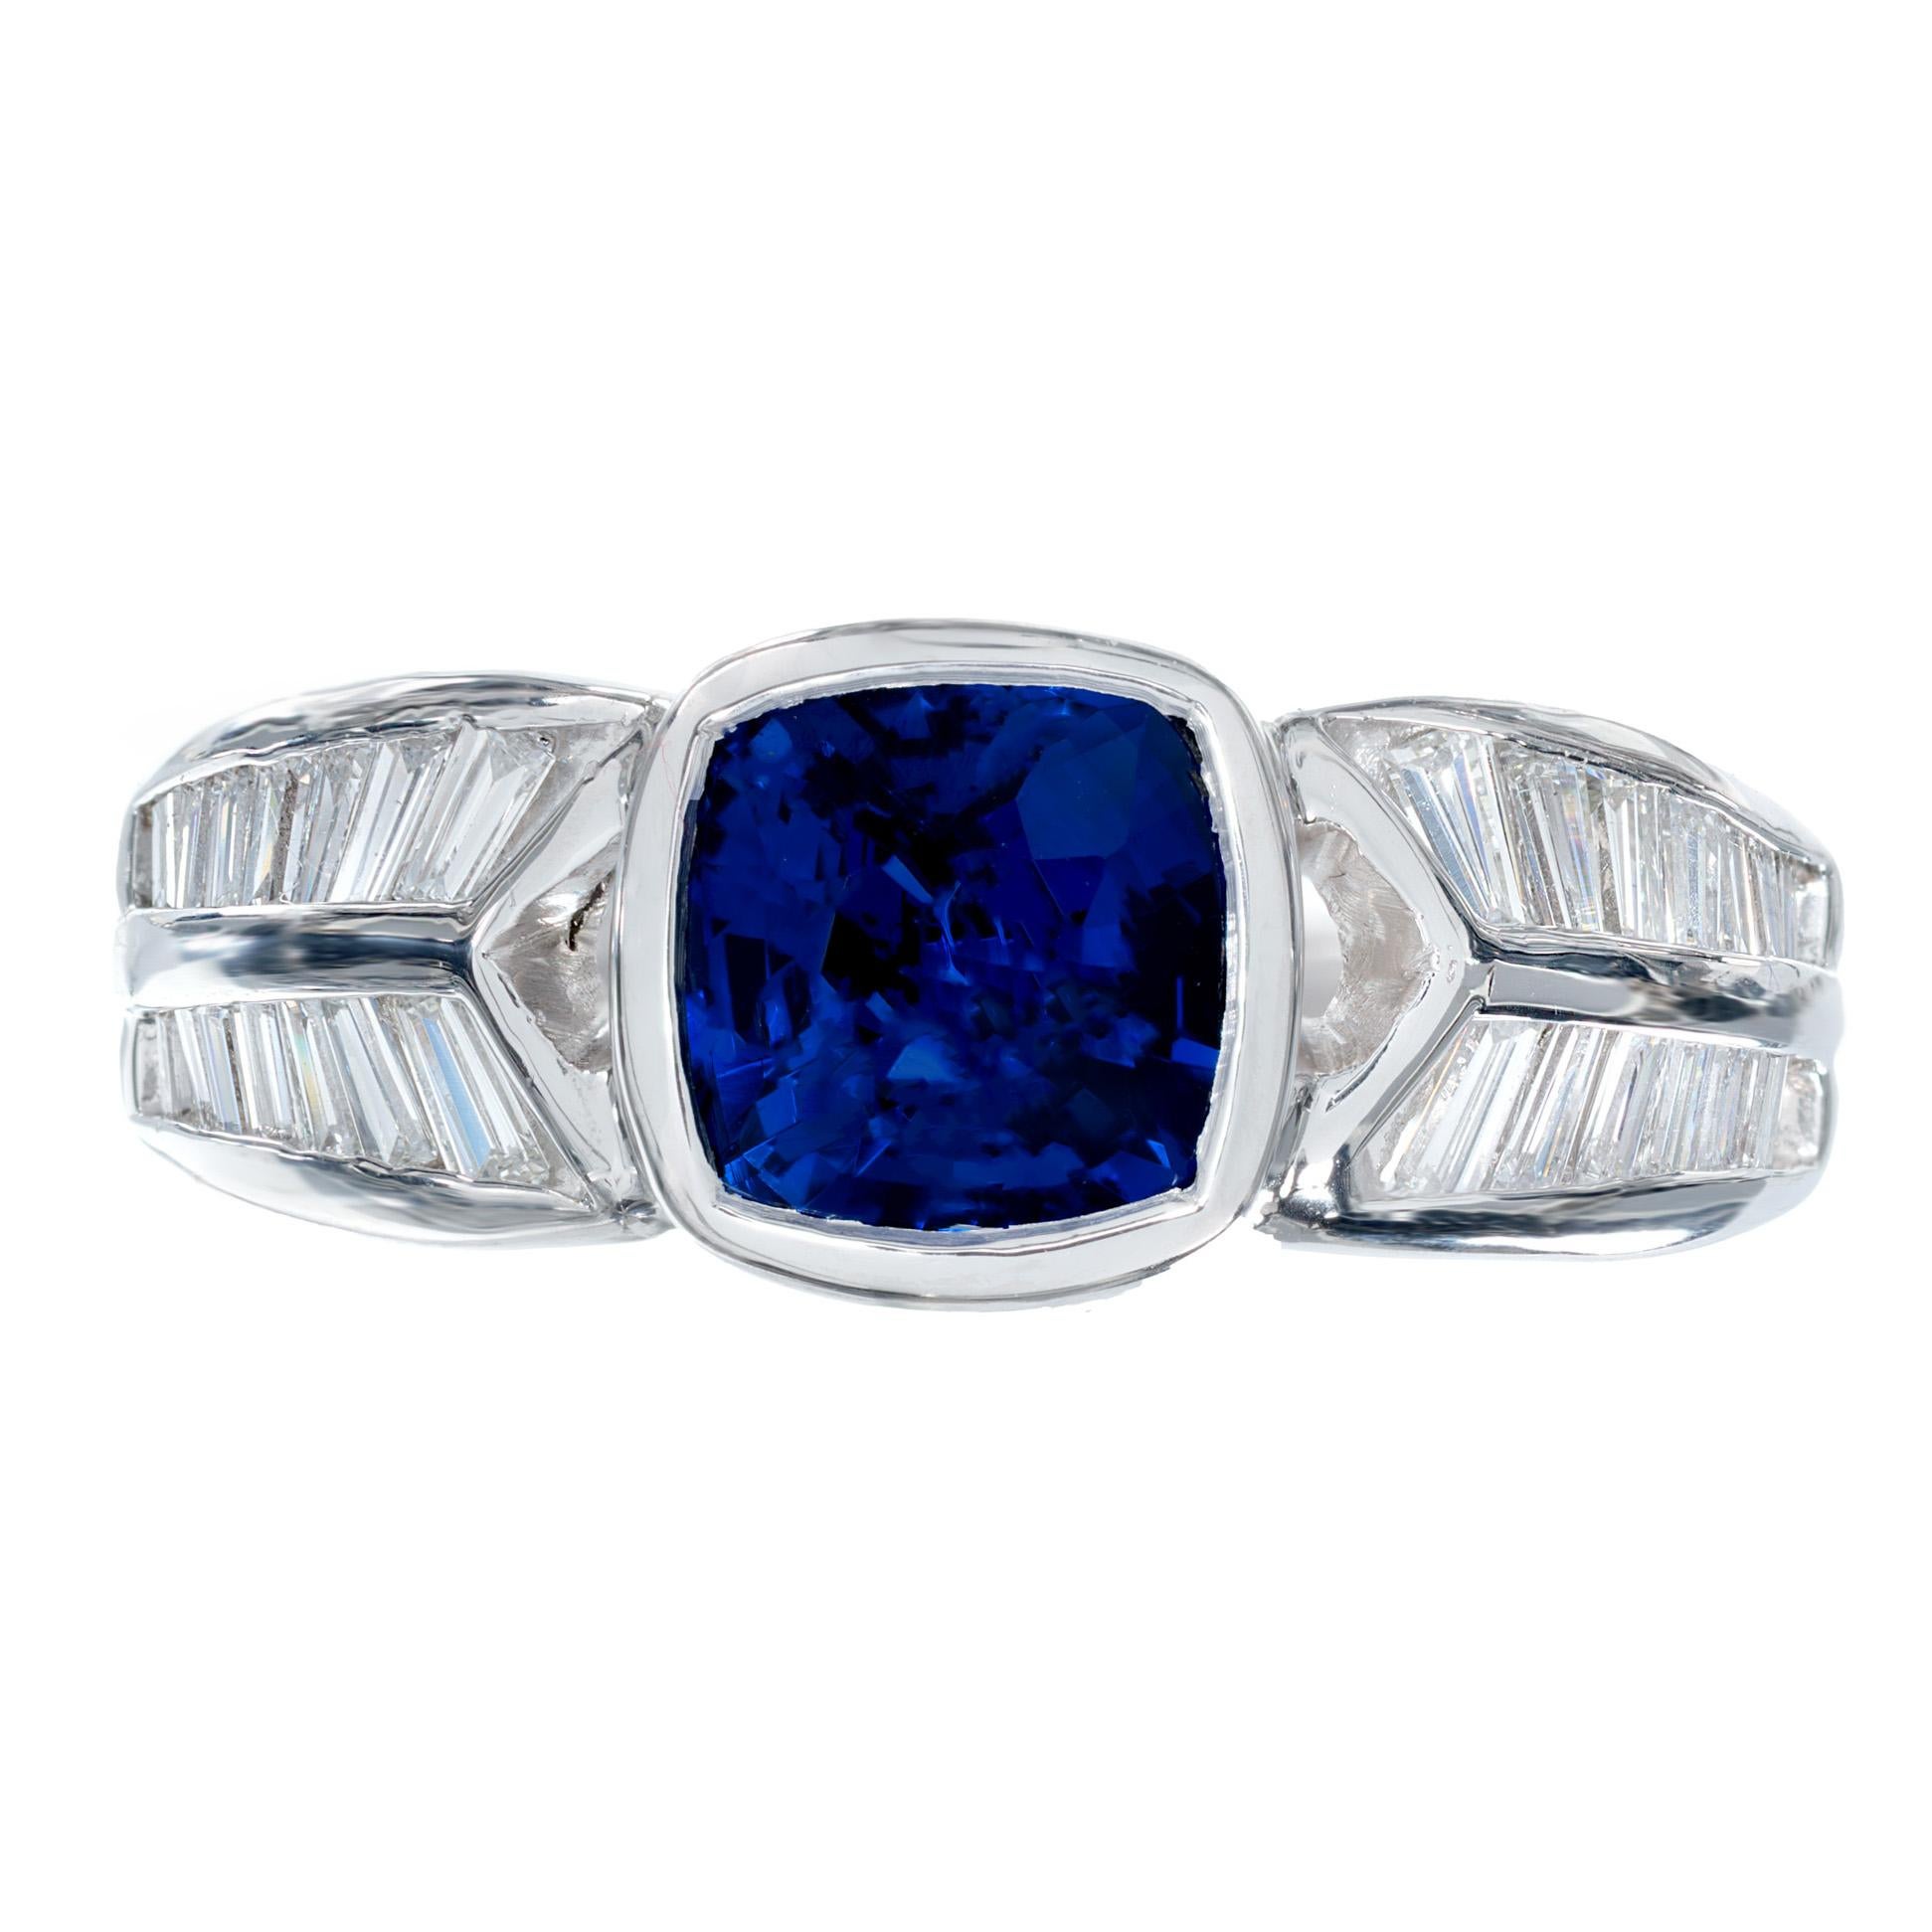 1950's bright blue sapphire and diamond engagement ring. GIA certified cushion cut bezel set sapphire center stone. Graded, natural, no heat and its origin being Madagascar.  Set in a platinum setting with 28 baguette diamonds along each side of the